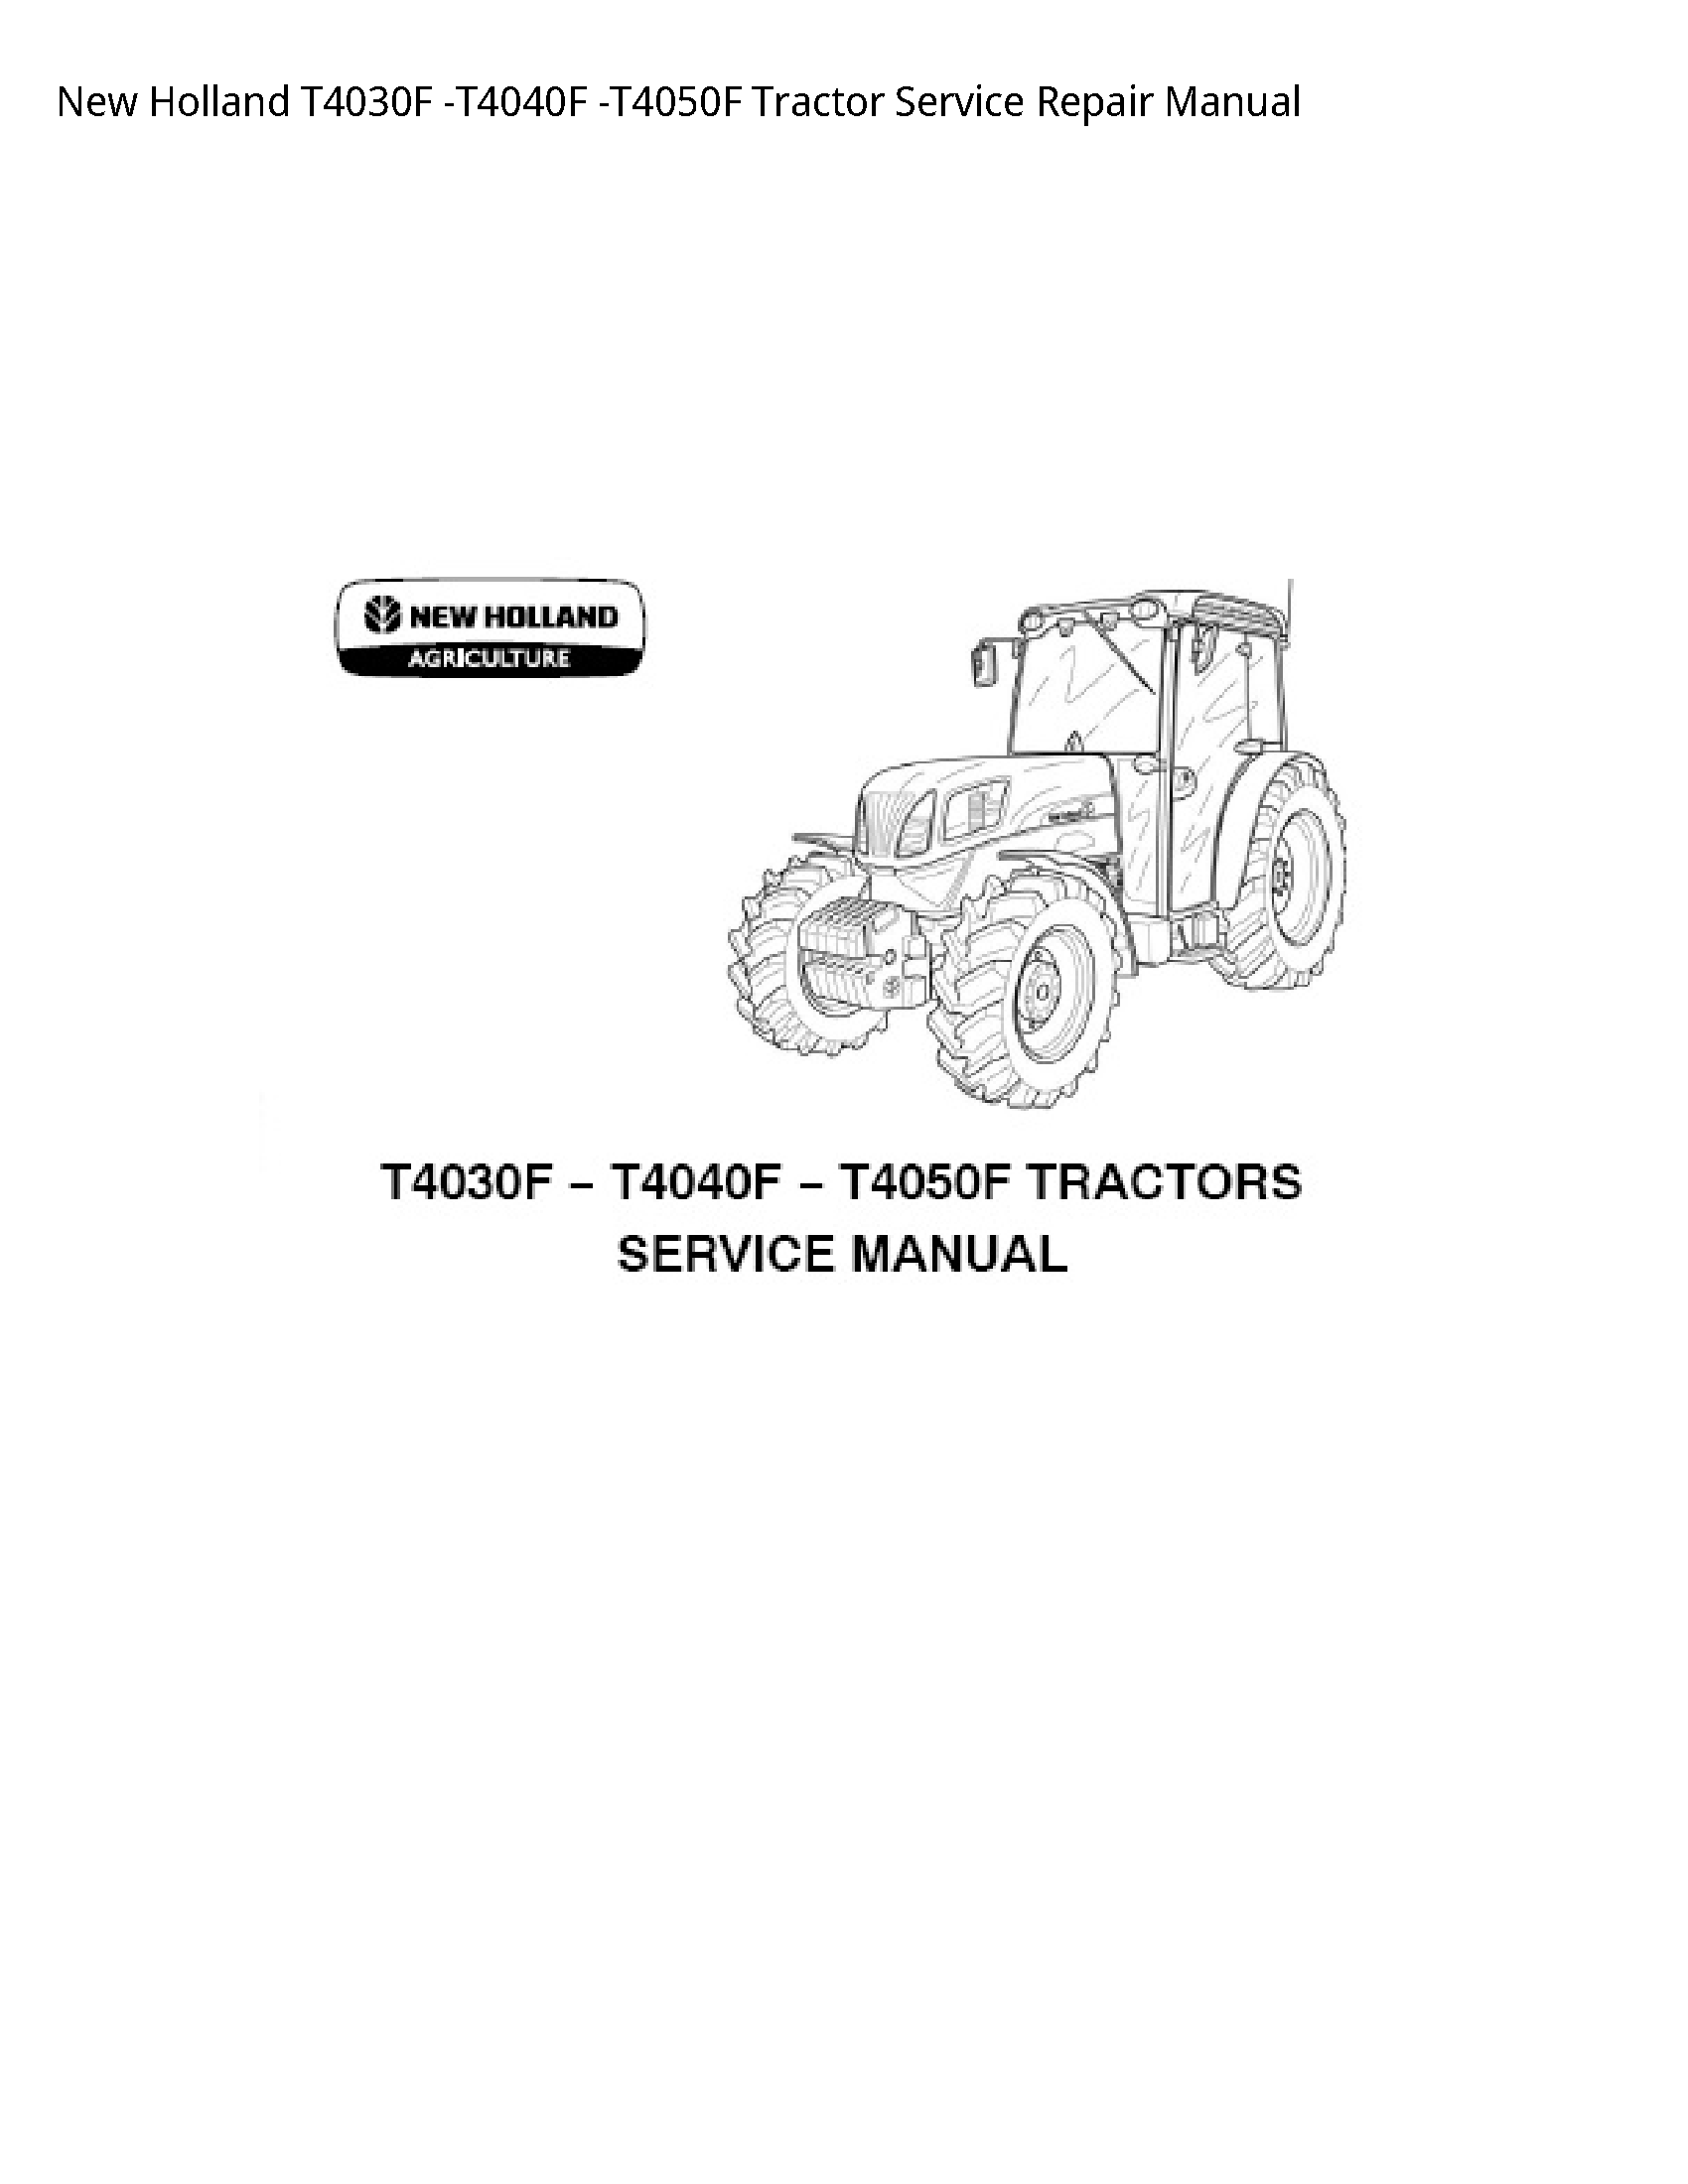 New Holland T4030F Tractor manual